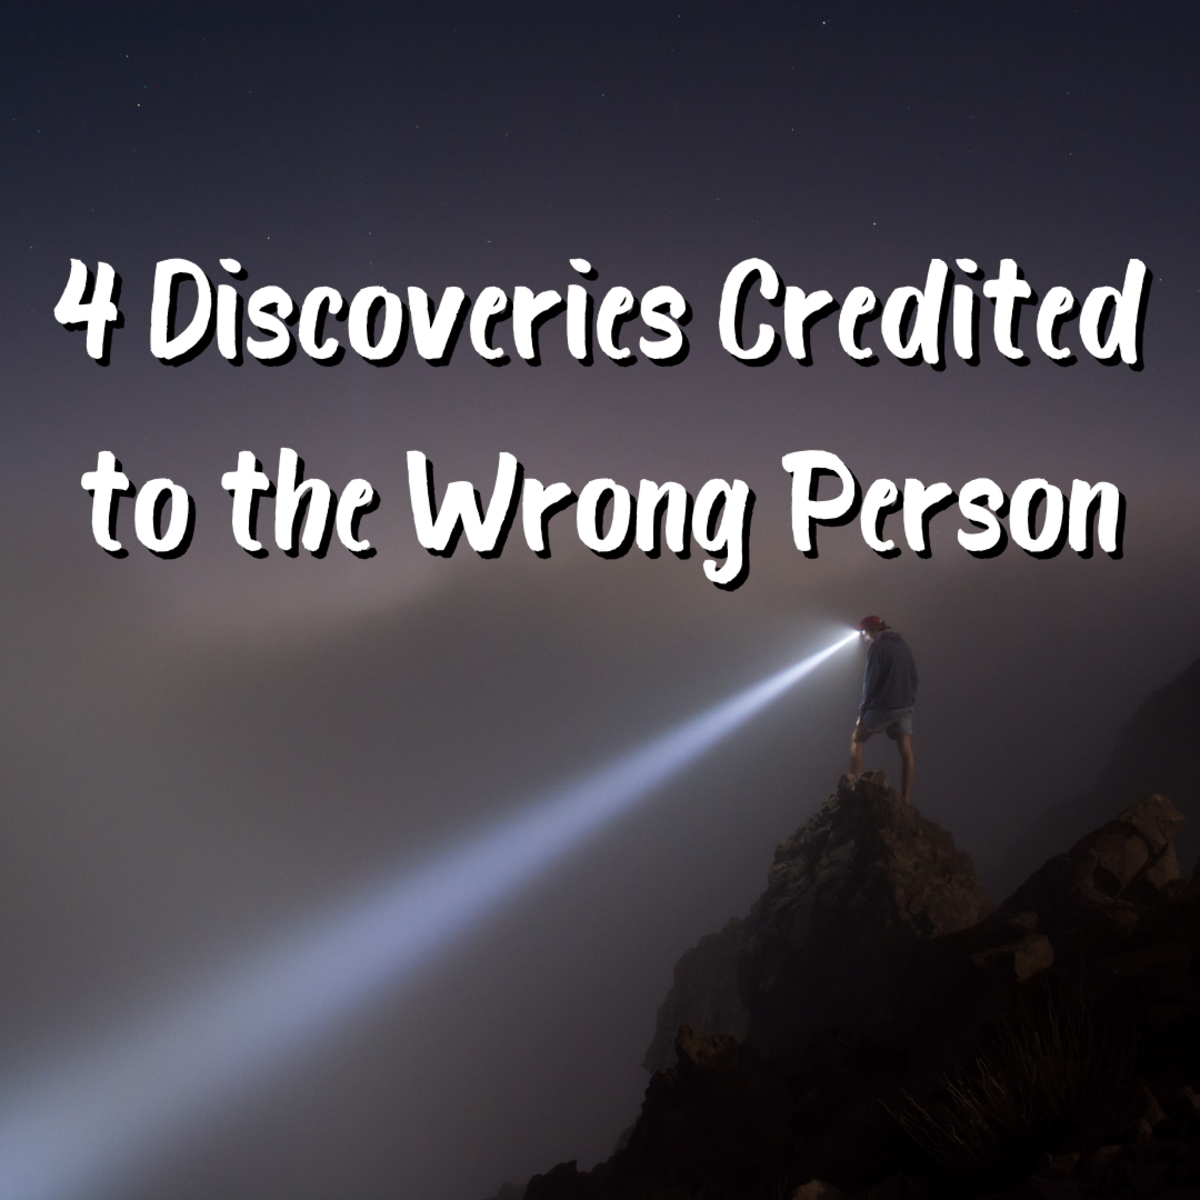 4 Discoveries Credited to the Wrong Person